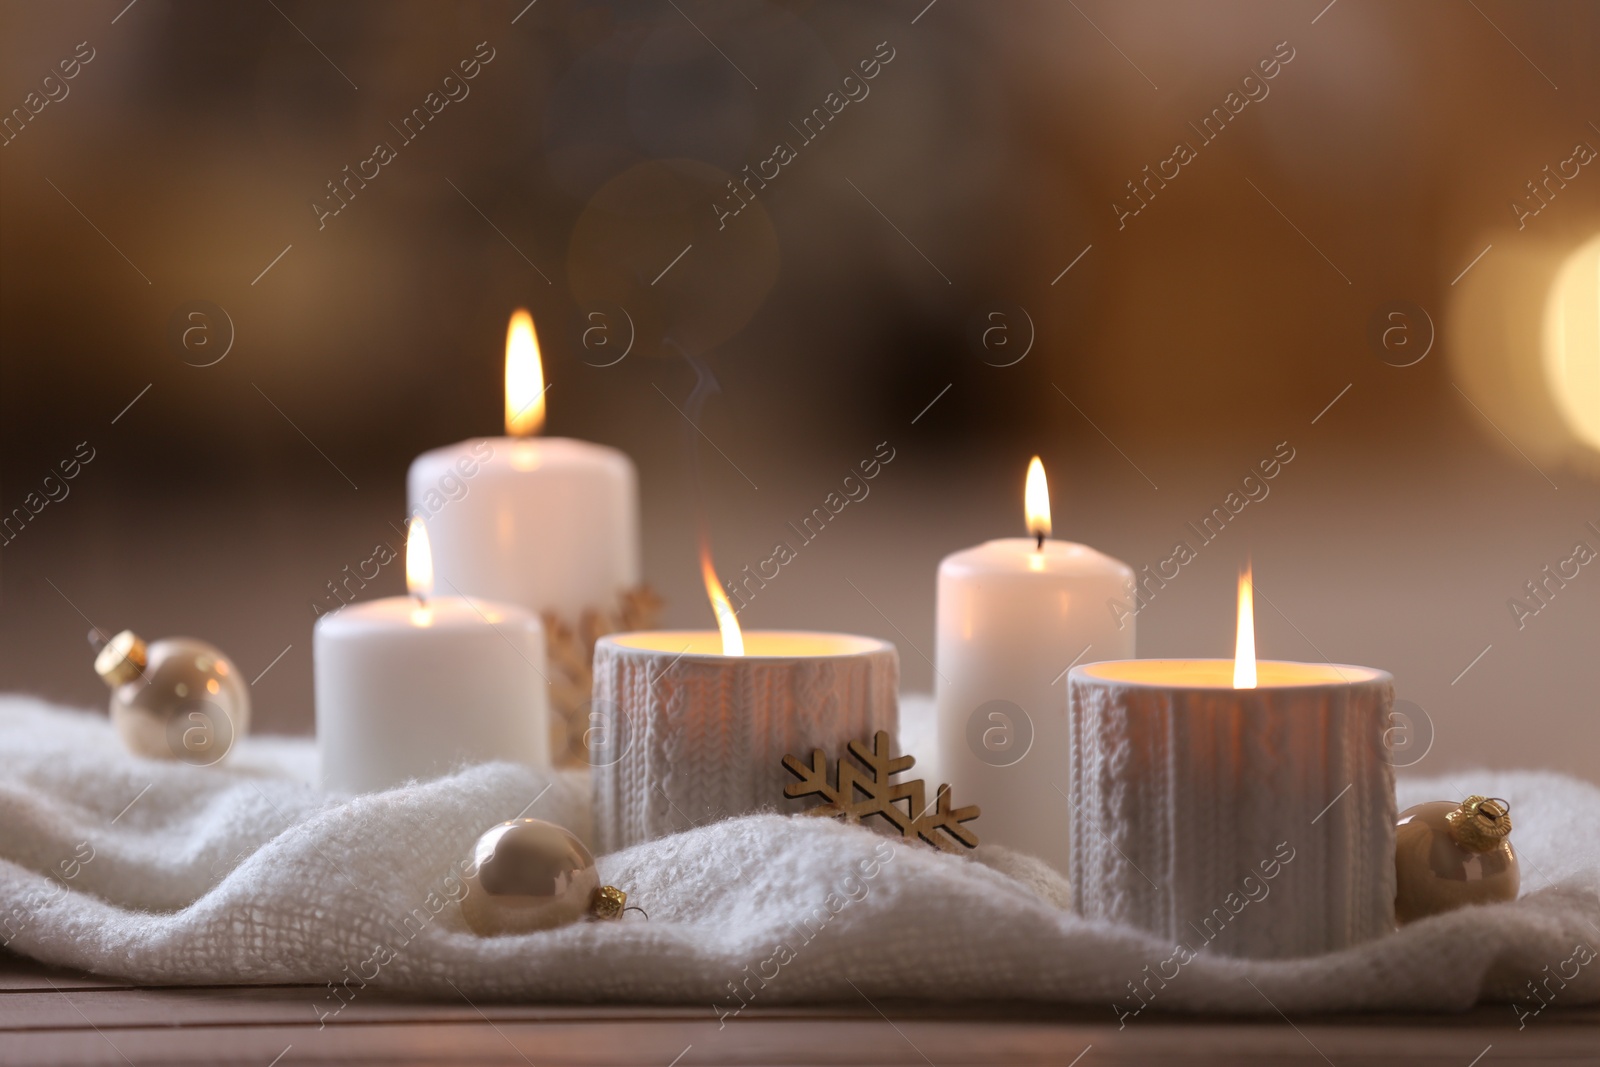 Photo of Composition with candles in ornate holder on wooden table against blurred background. Christmas decoration